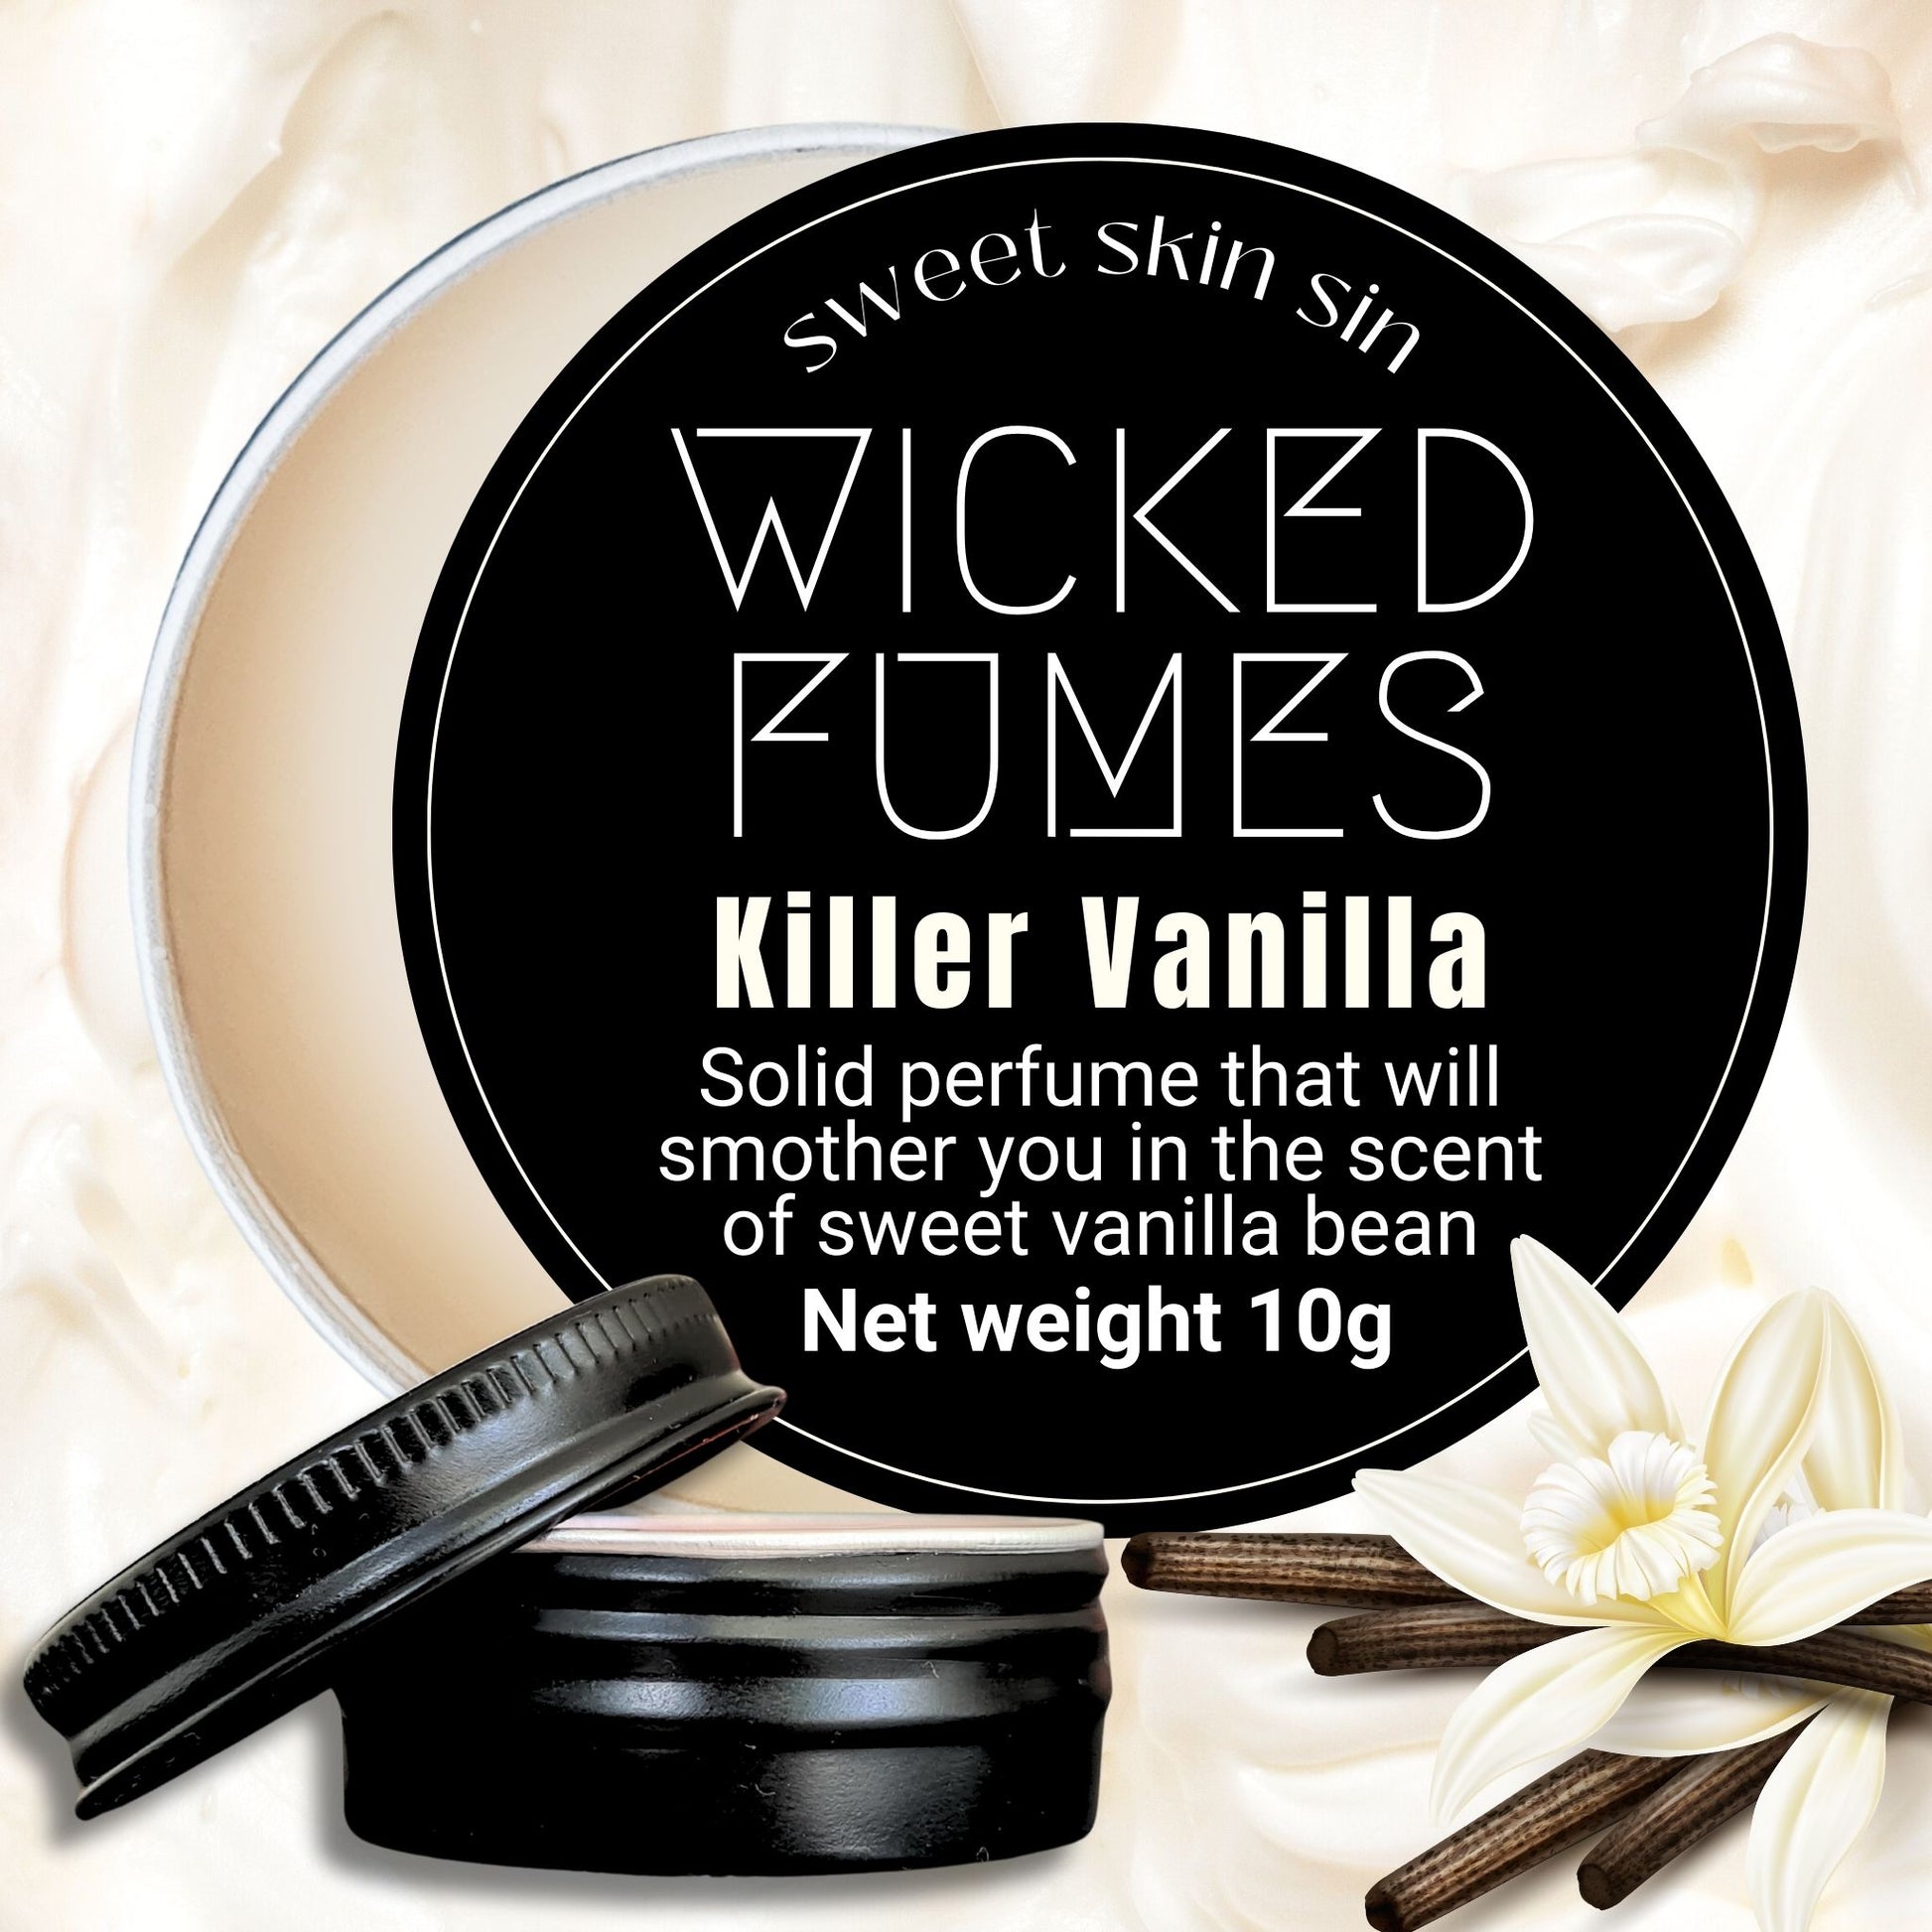 Image of a solid perfume called Killer Vanilla from Wicked Fumes in a small black round jar against an off white background with some vanilla pods and flowers pictured